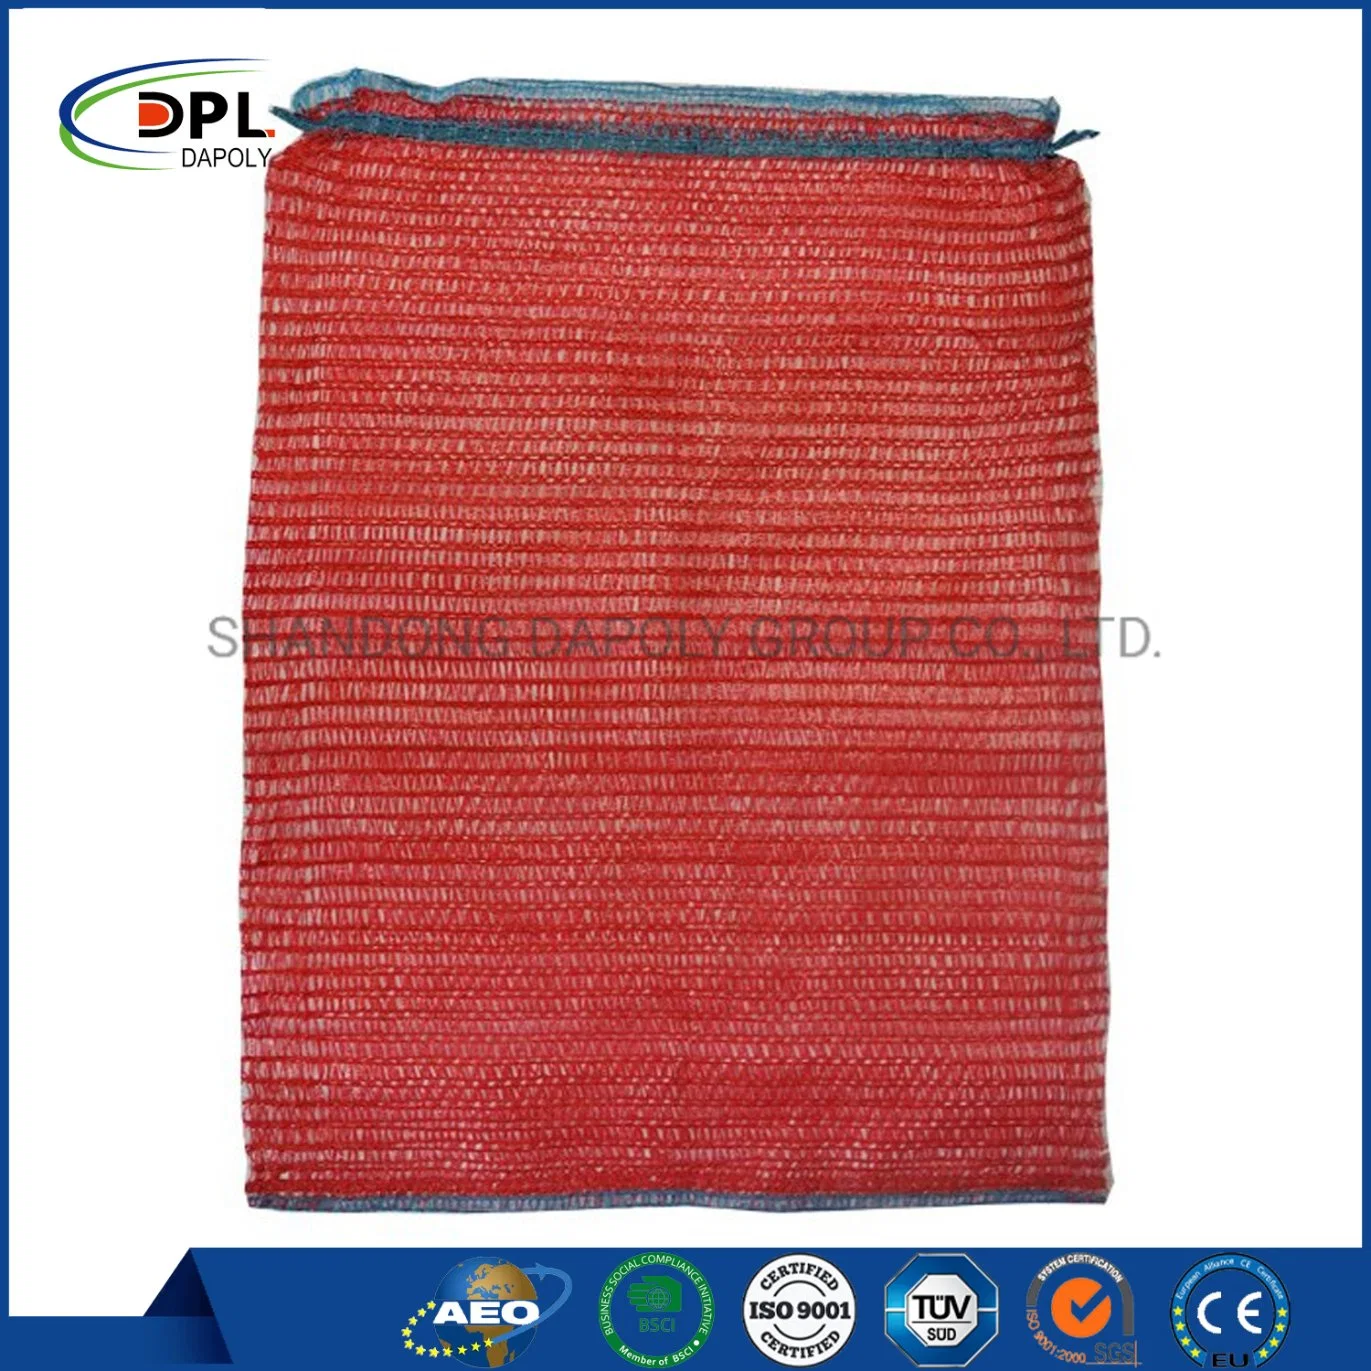 PP Potatoes Woven Mesh Net Packing Bag 50kg for Packing Onions